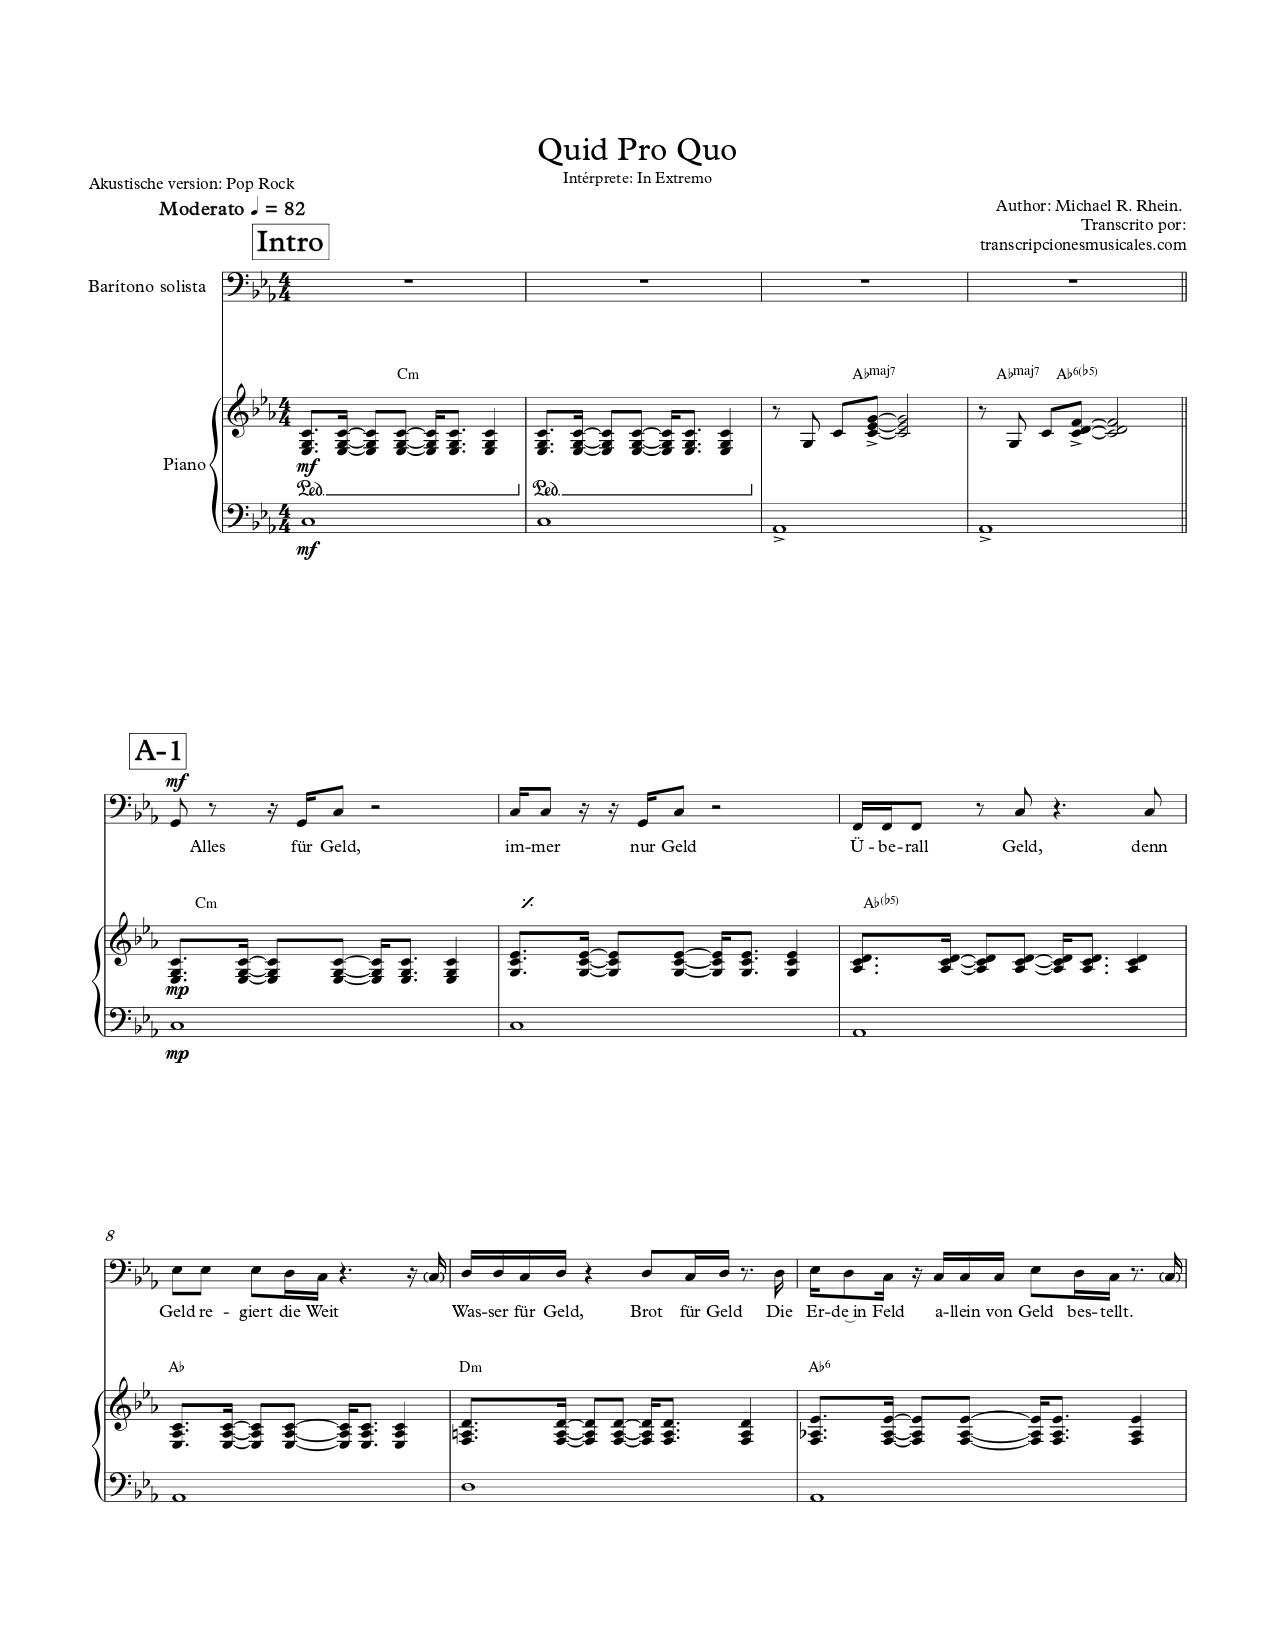 Quid pro Quo - sheet music page 1